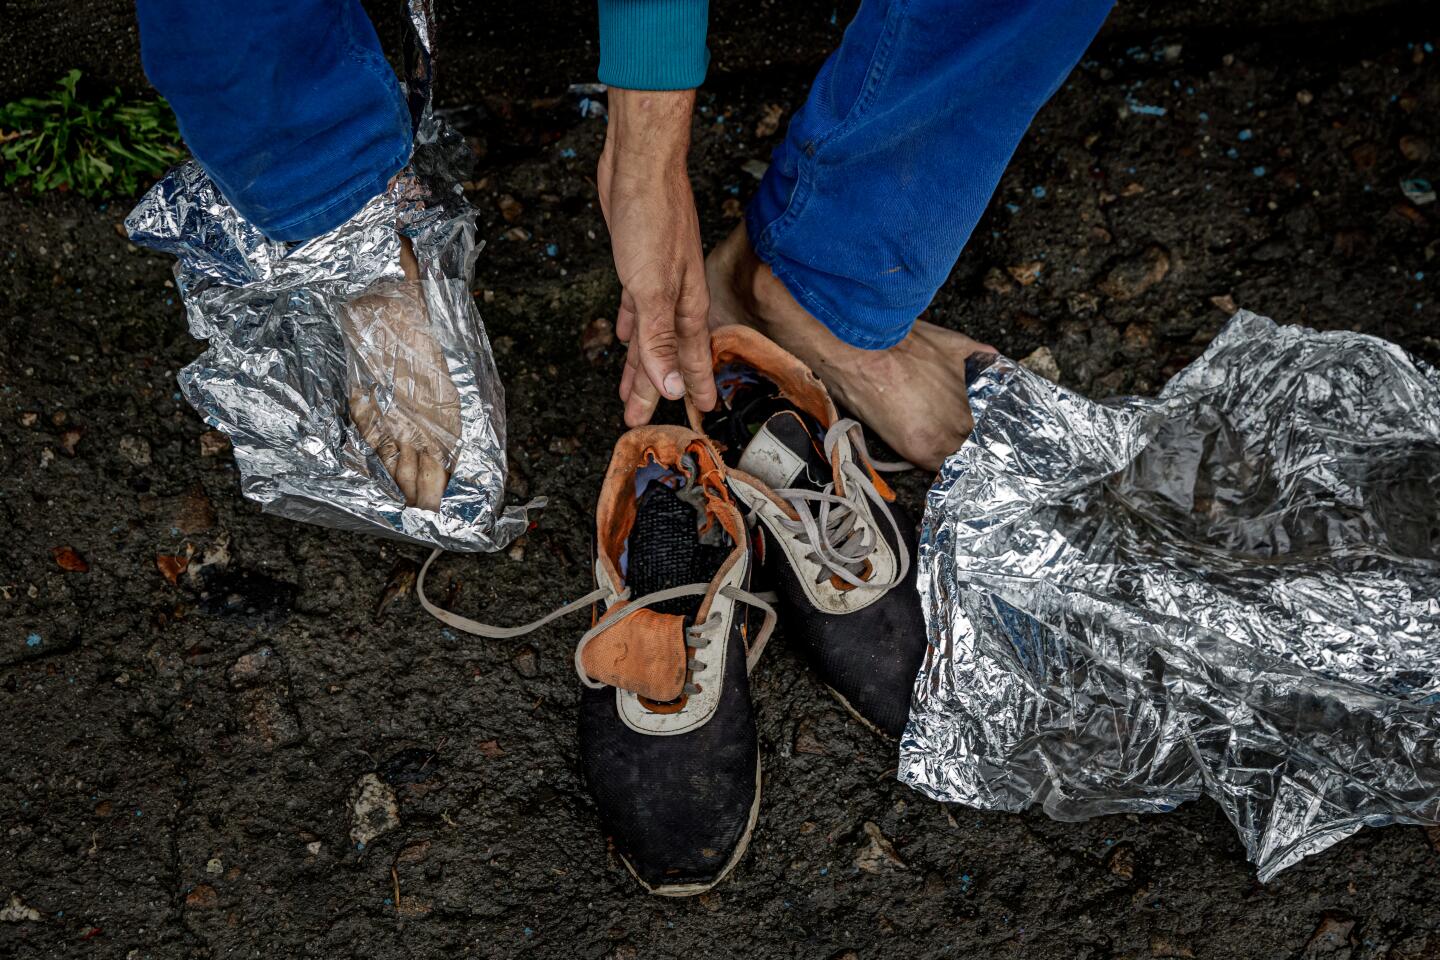 A Venezuelan man stuffs his shoes with makeshift socks made of strips of emergency blankets after leaving a shelter in Pamplona, Colombia.